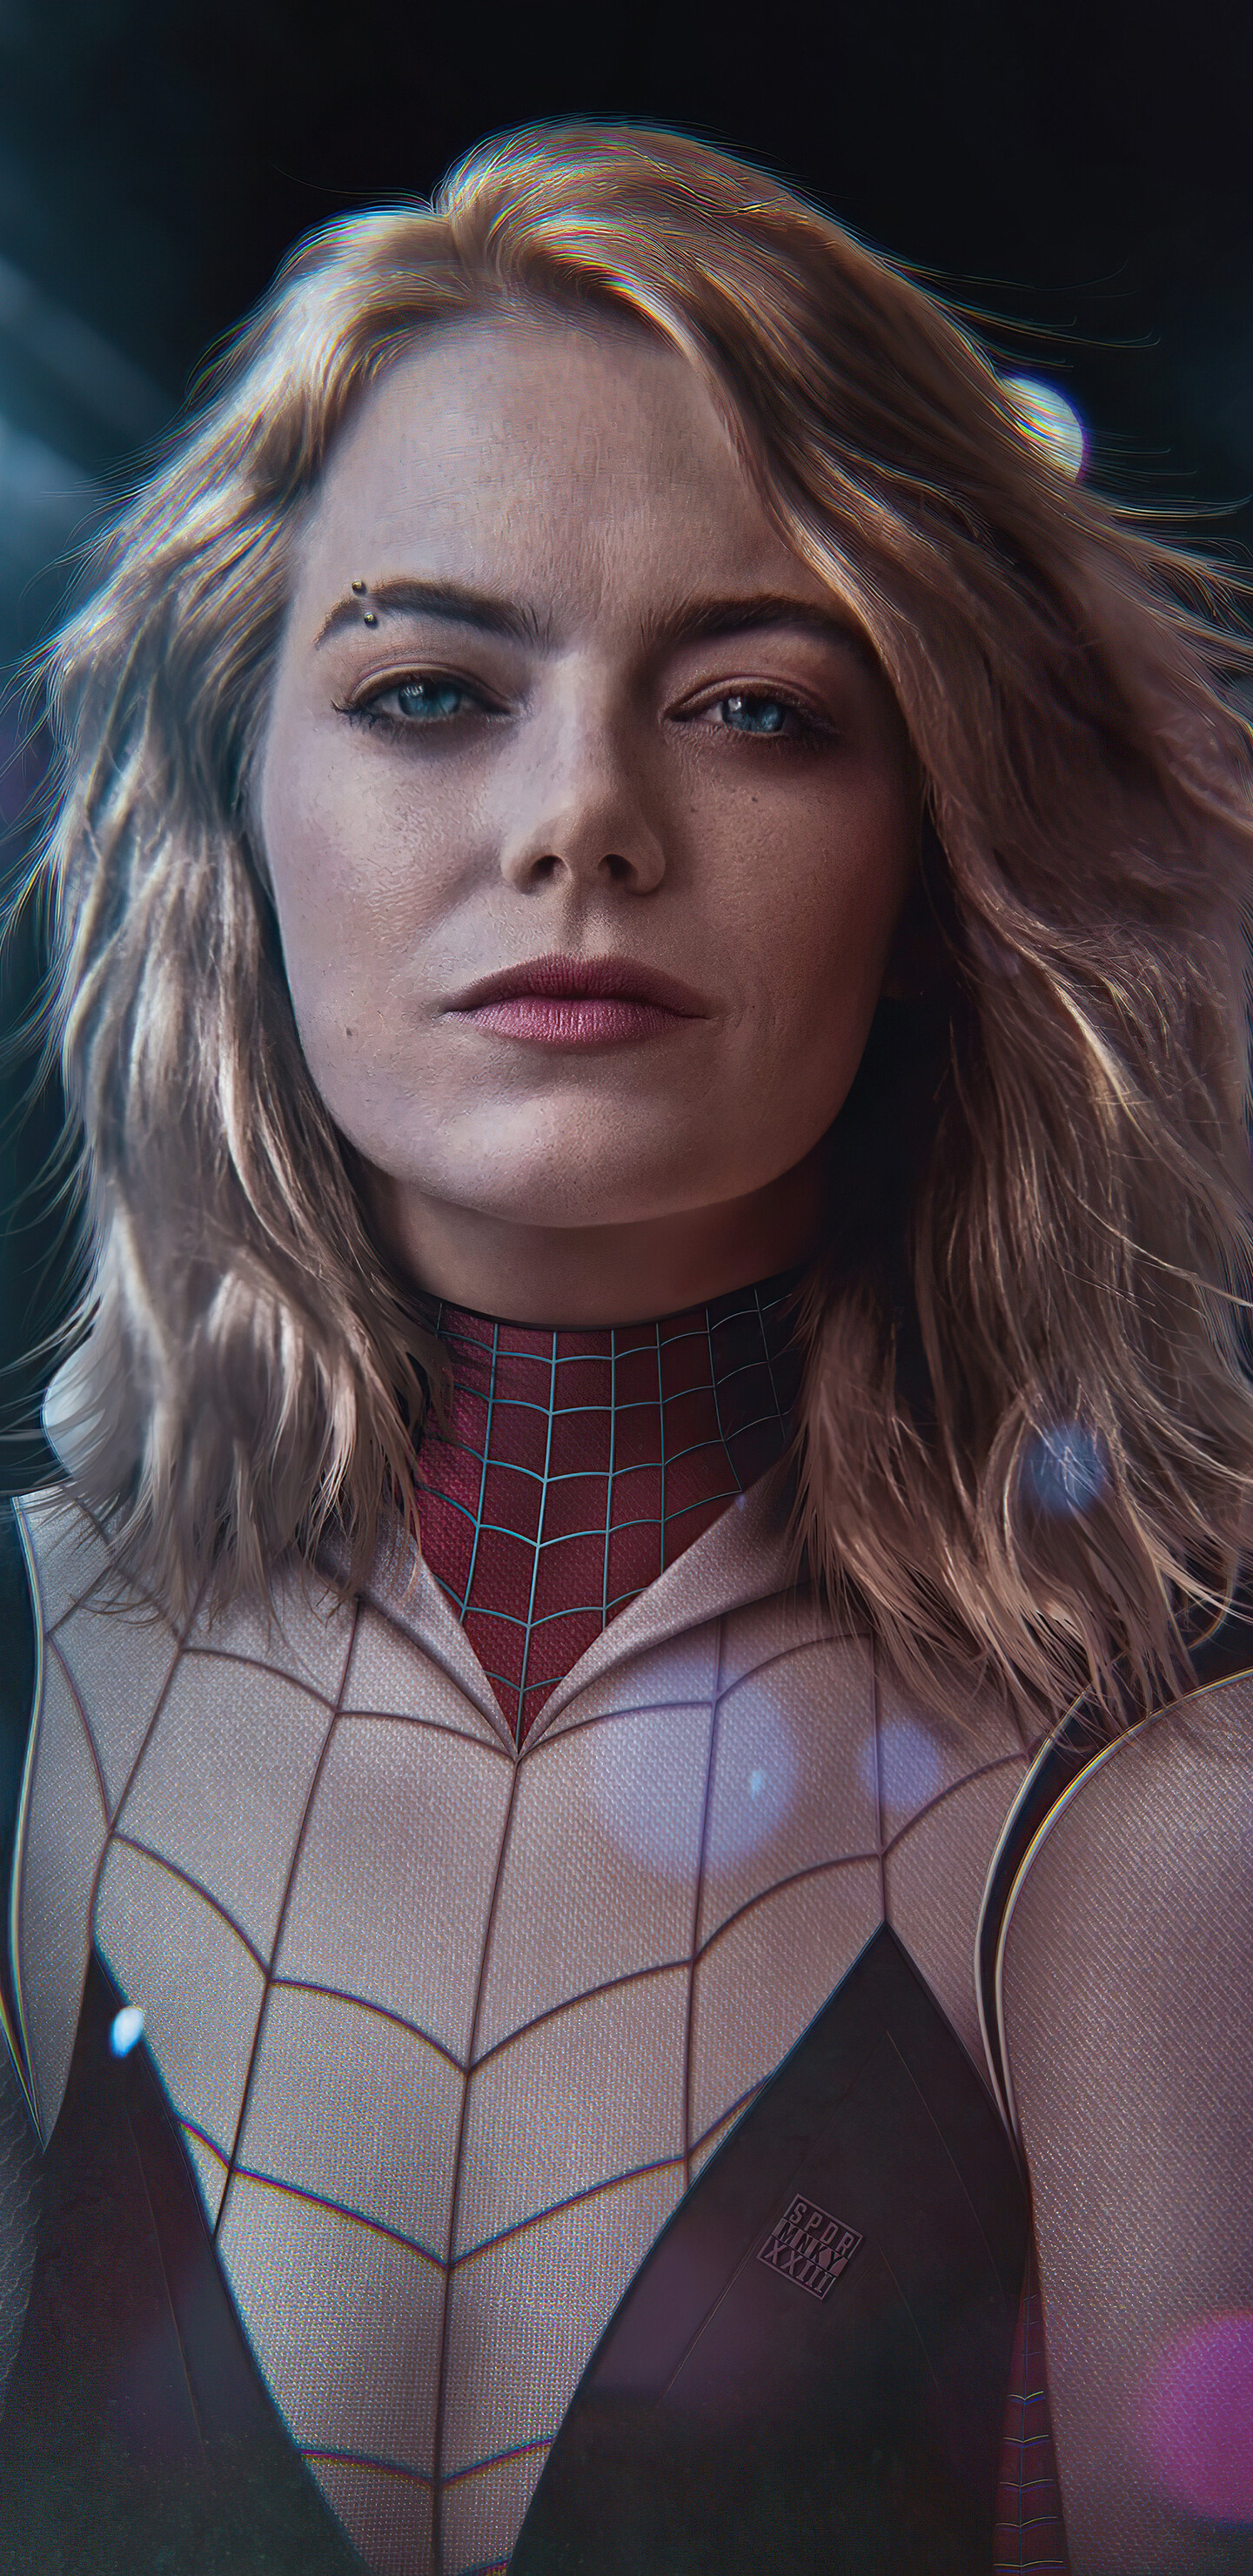 Gwen Stacy: Portrayed by Emma Stone in the films The Amazing Spider-Man and The Amazing Spider-Man 2. 1440x2960 HD Background.